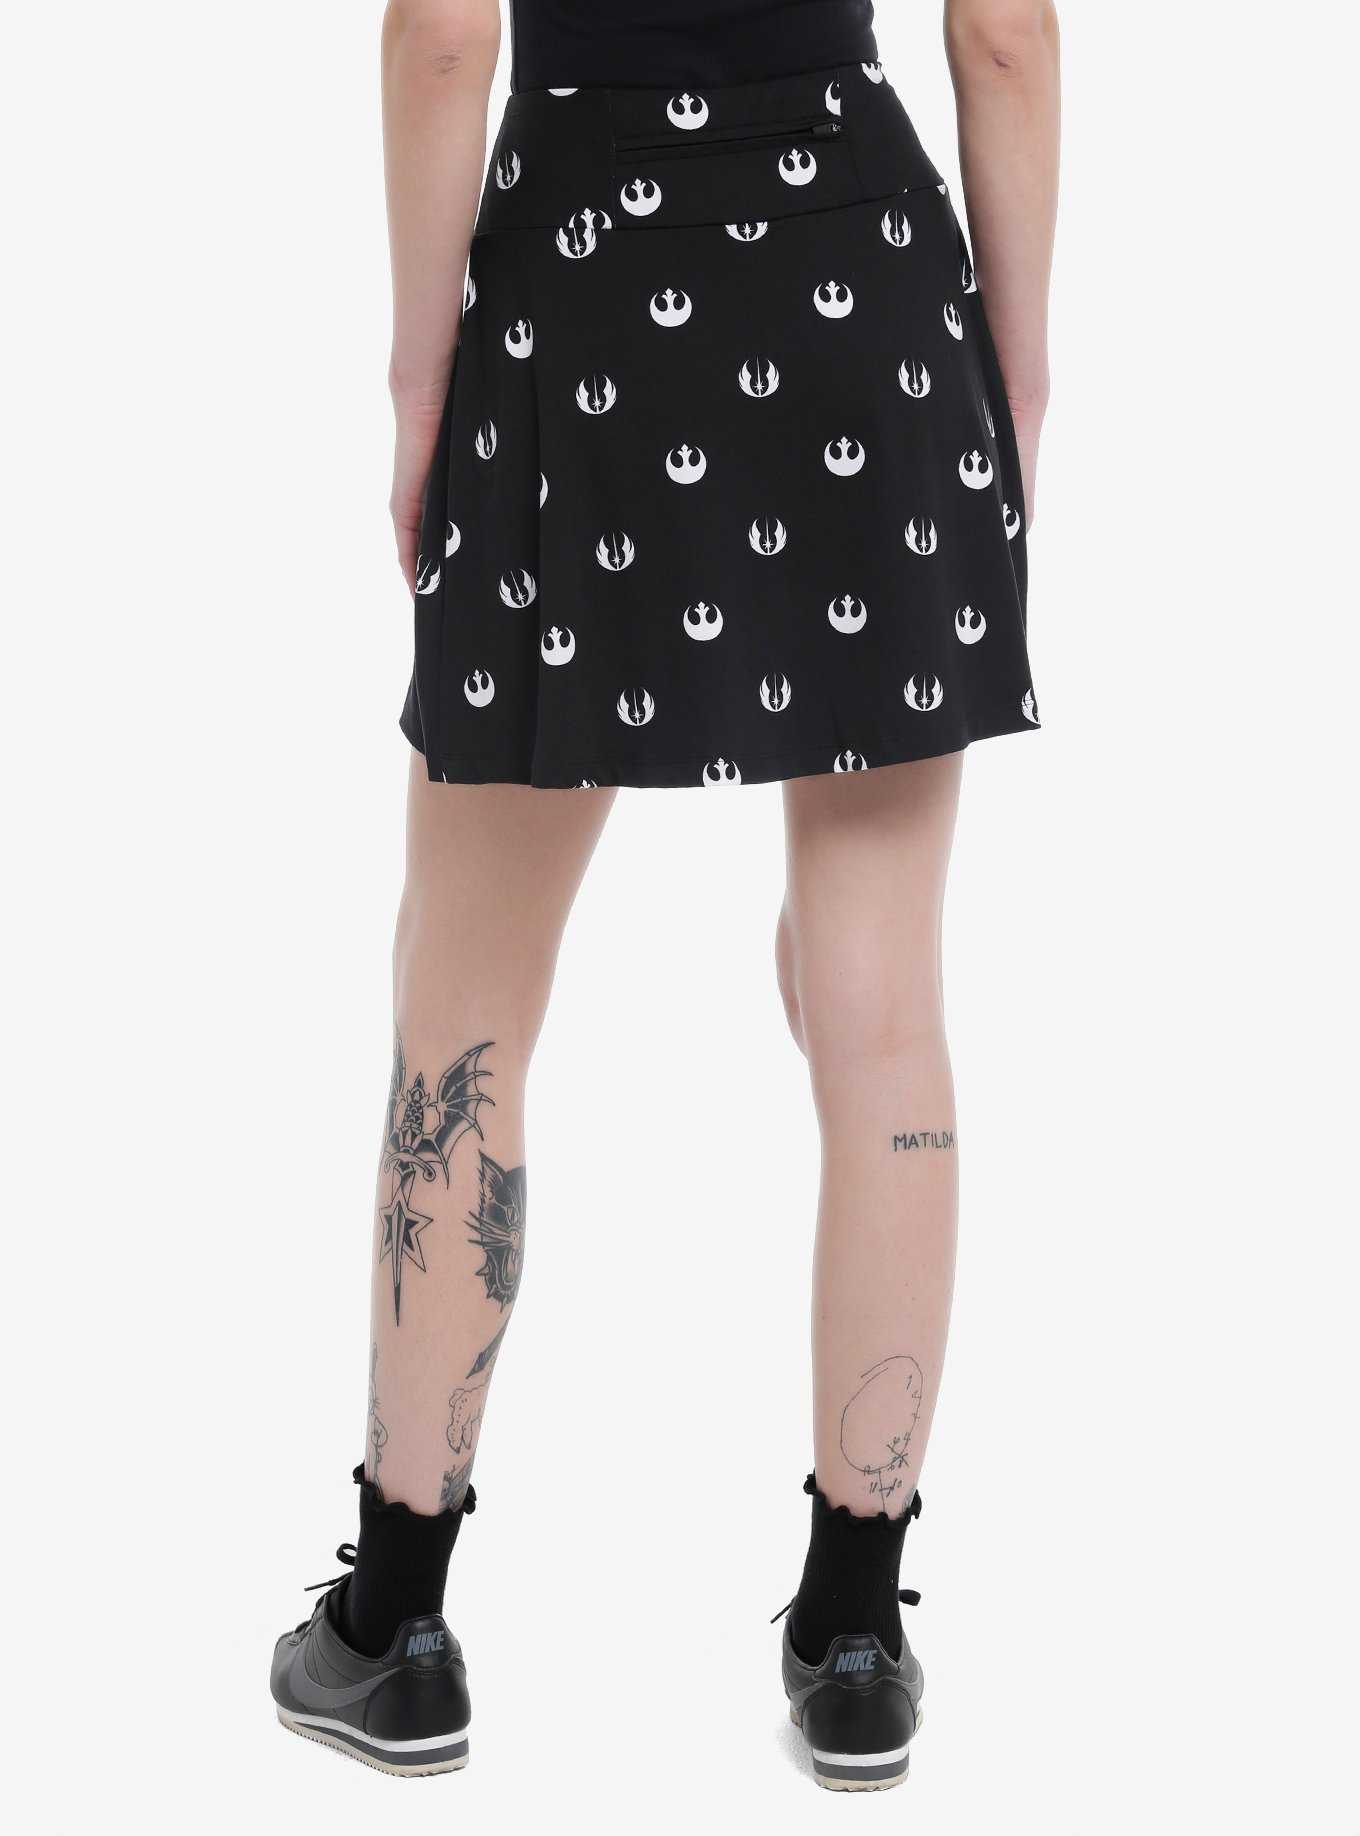 Her Universe Star Wars Icons Asymmetrical Athletic Skort Her Universe Exclusive, , hi-res